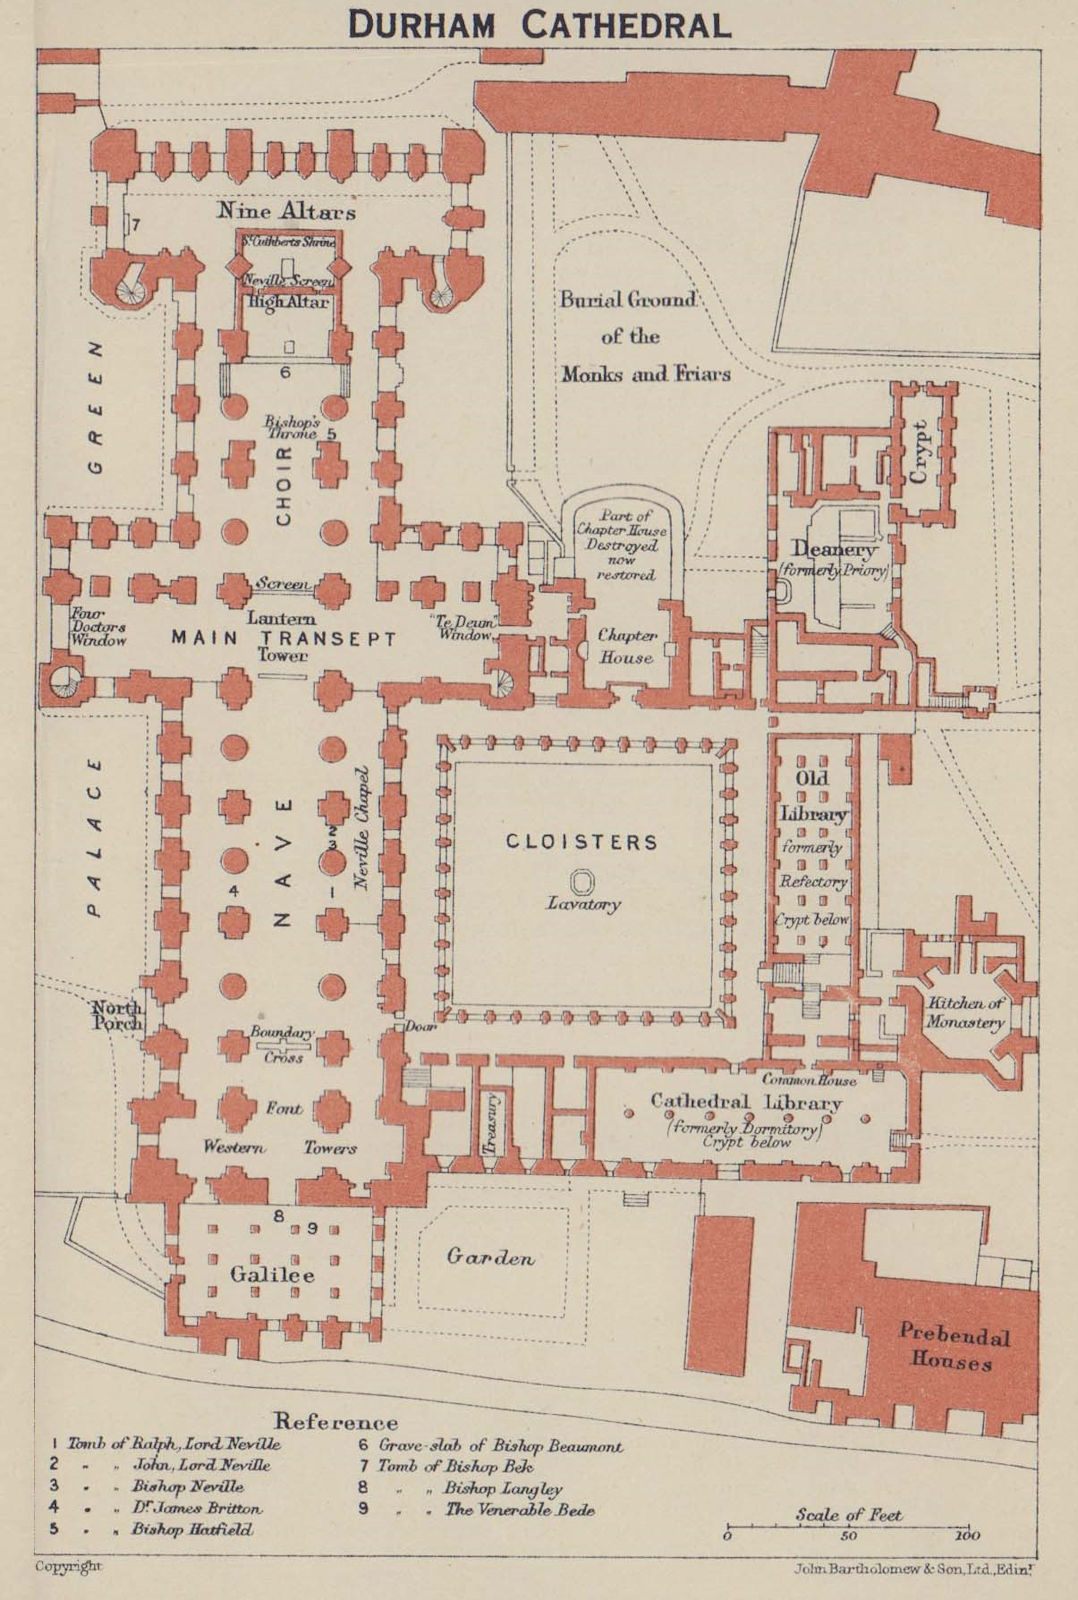 Associate Product Durham Cathedral ground floor plan. Durham 1920 old antique map chart